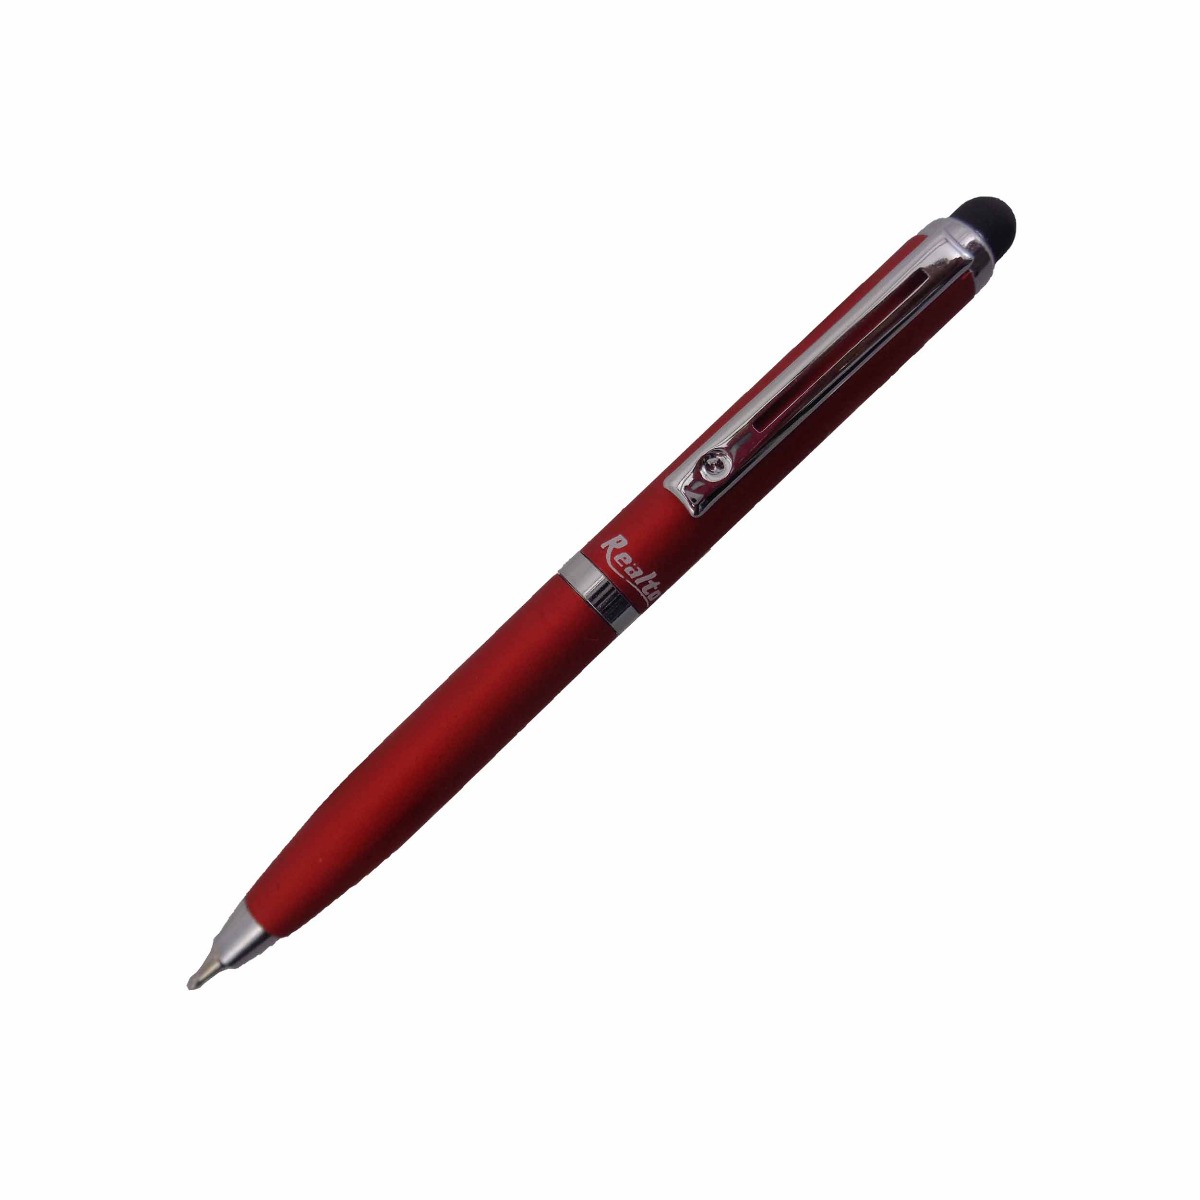 Realto Model:15527 Short Pen Red Color Mat Finish Body Fine Tip Twist Ball Pen  With Stylus on Top